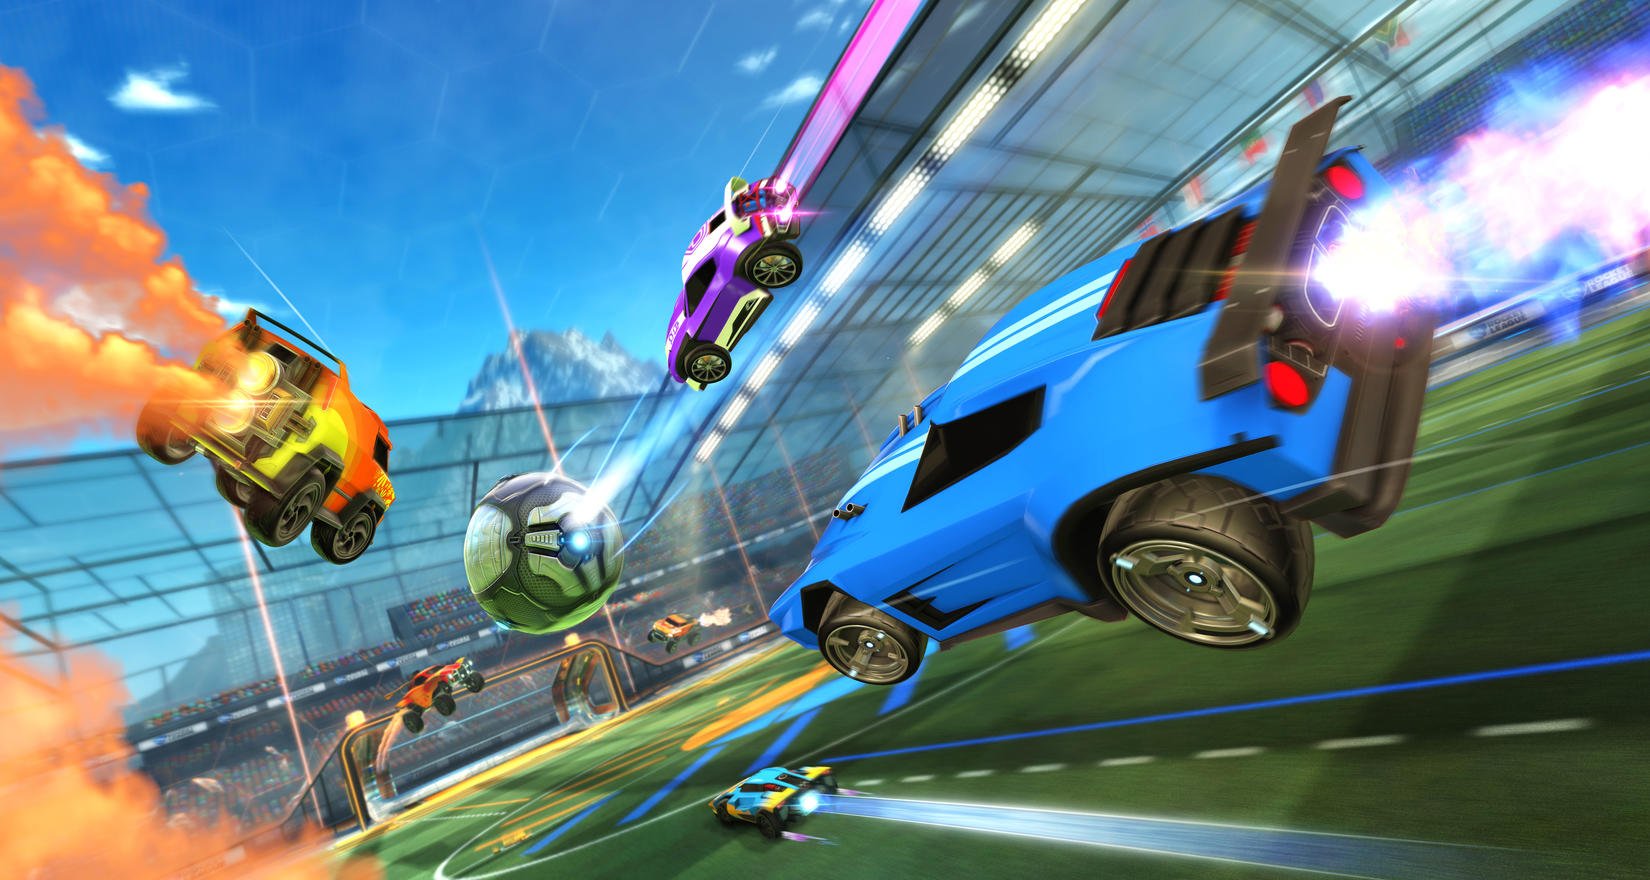 How to watch the Rocket League Championship Series